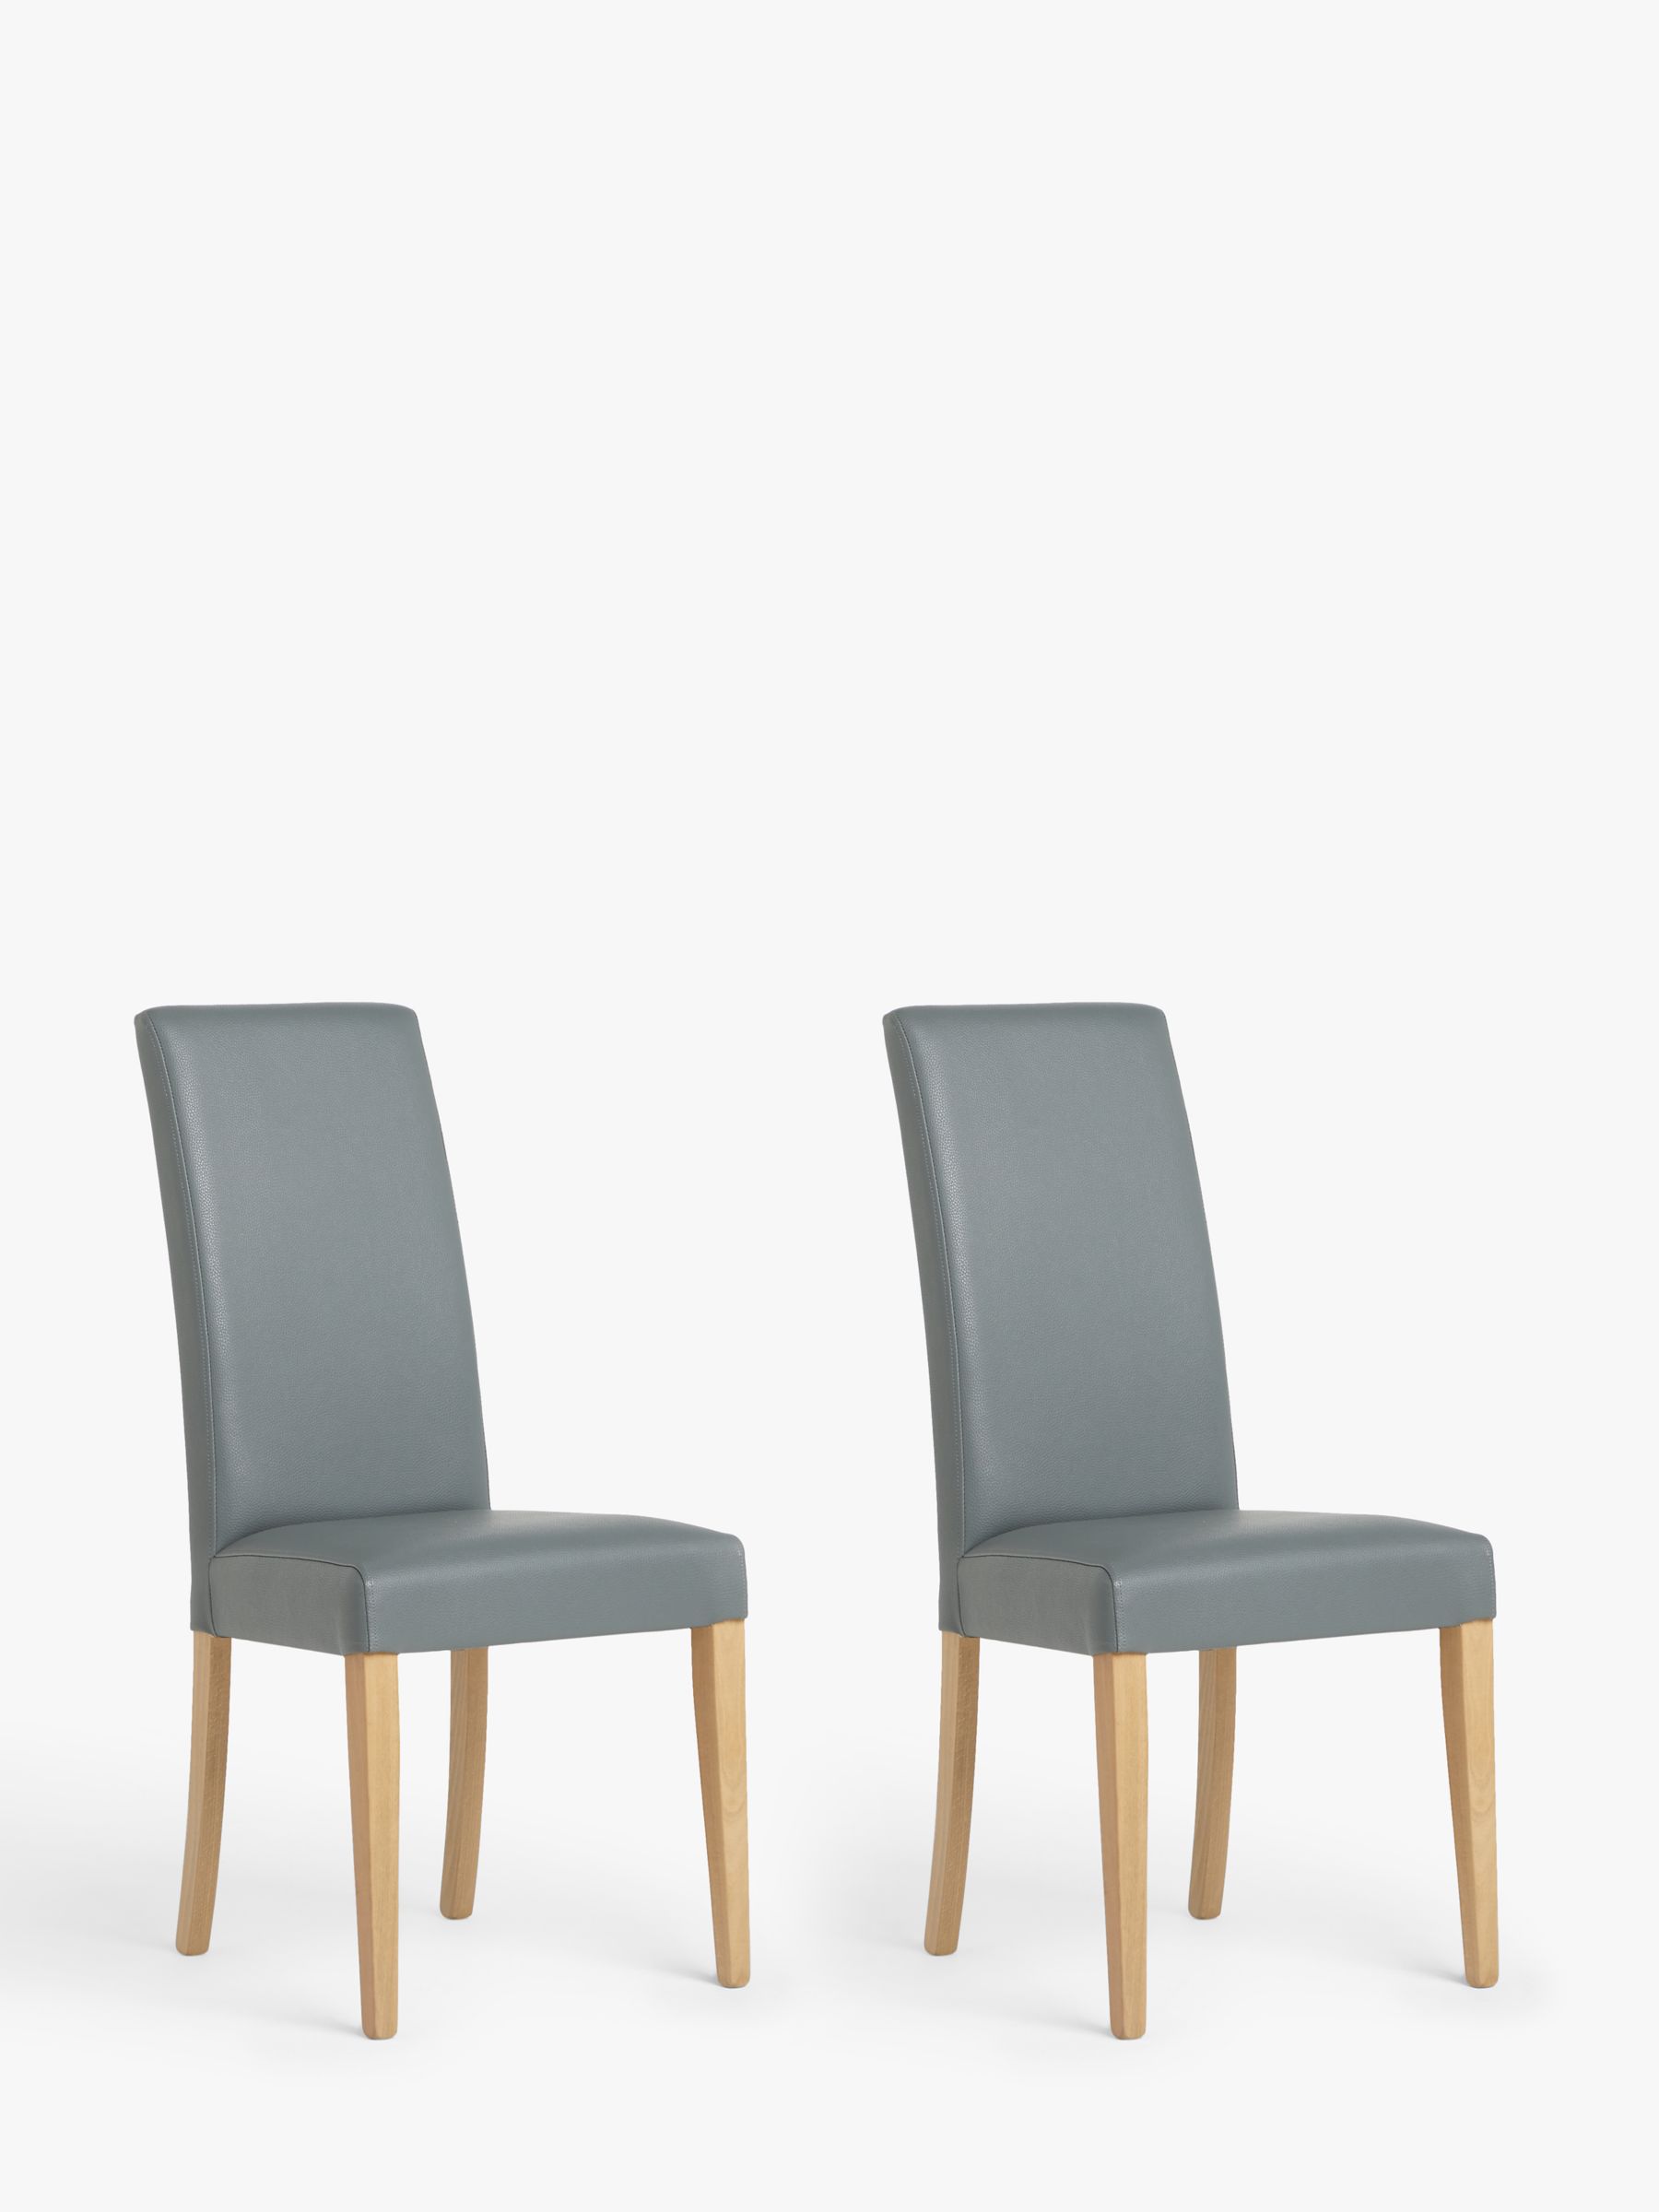 Photo of John lewis anyday slender faux leather dining chairs set of 2